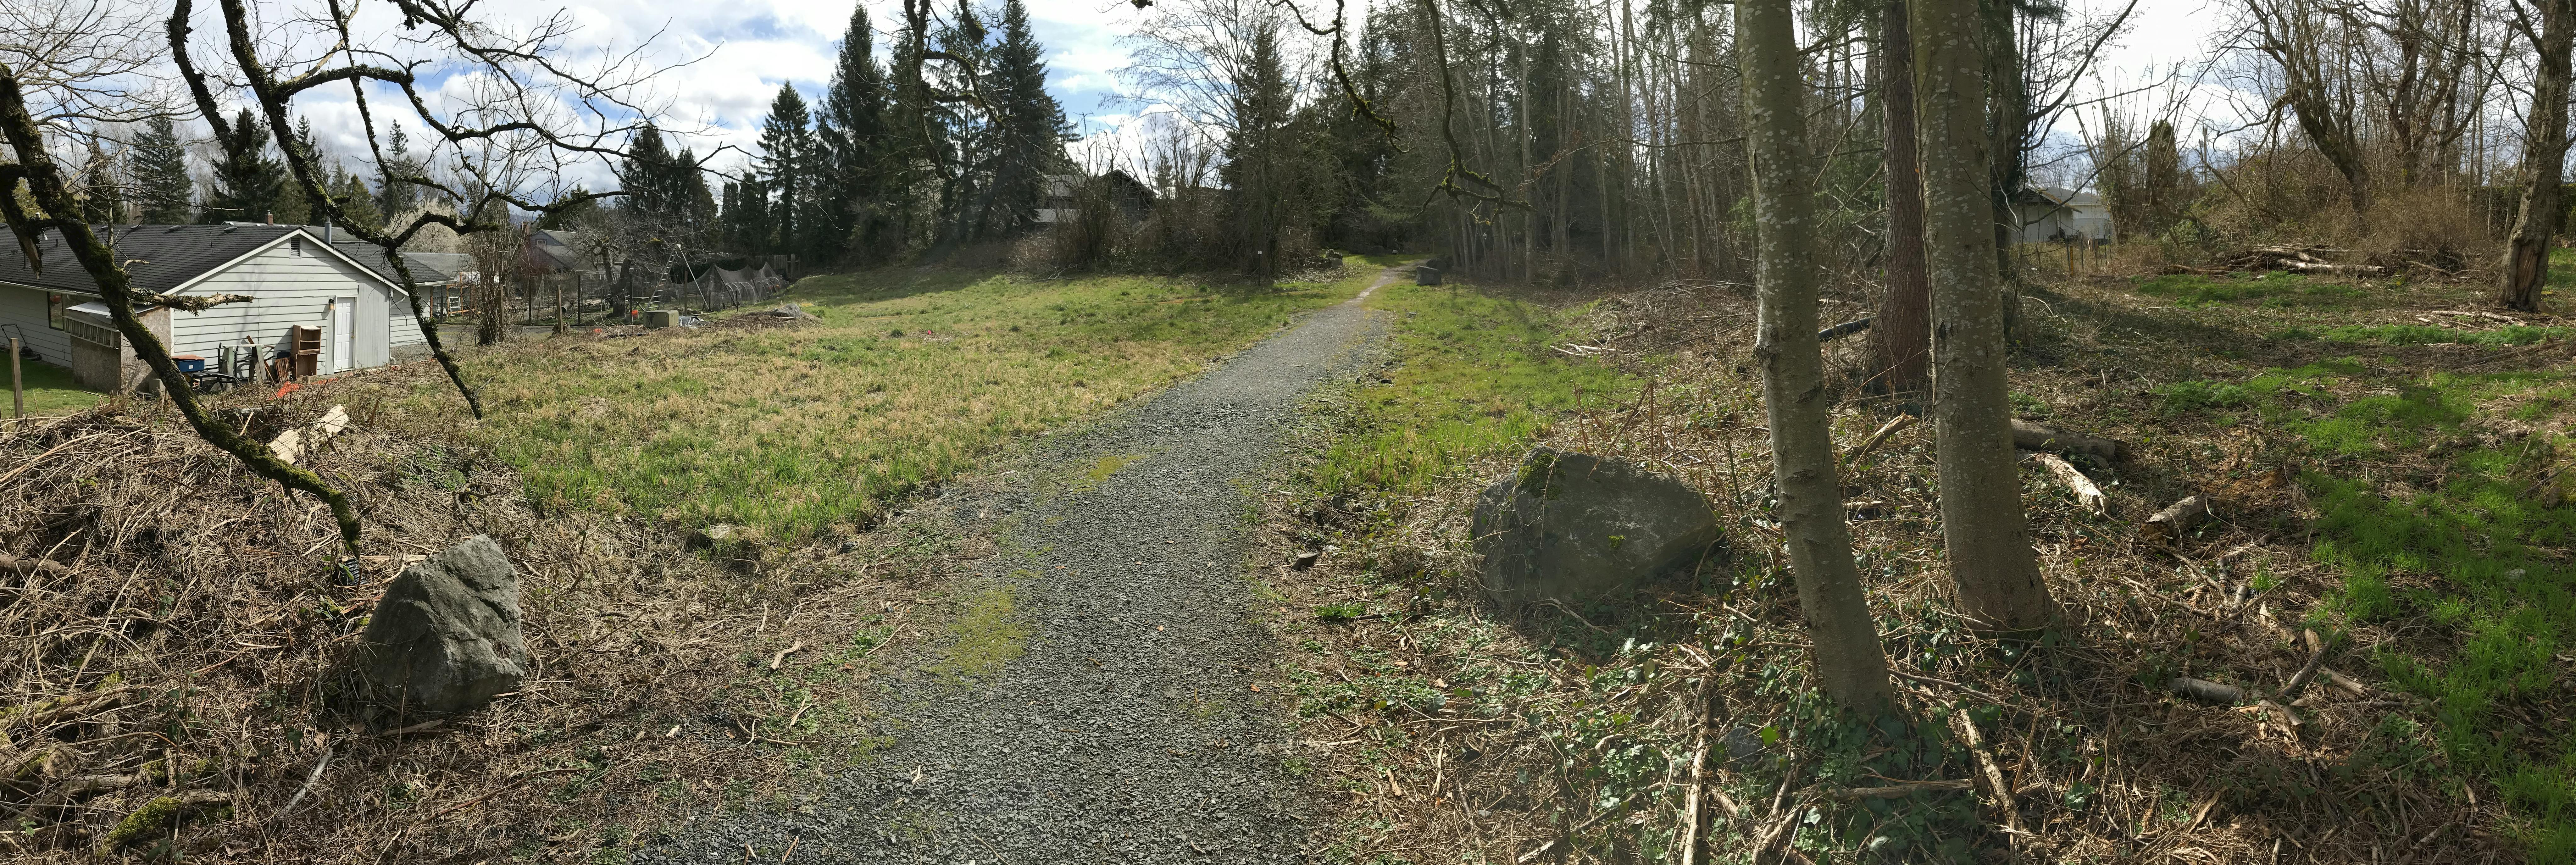 View south along existing trail towards Cherrywood Avenue pond area.